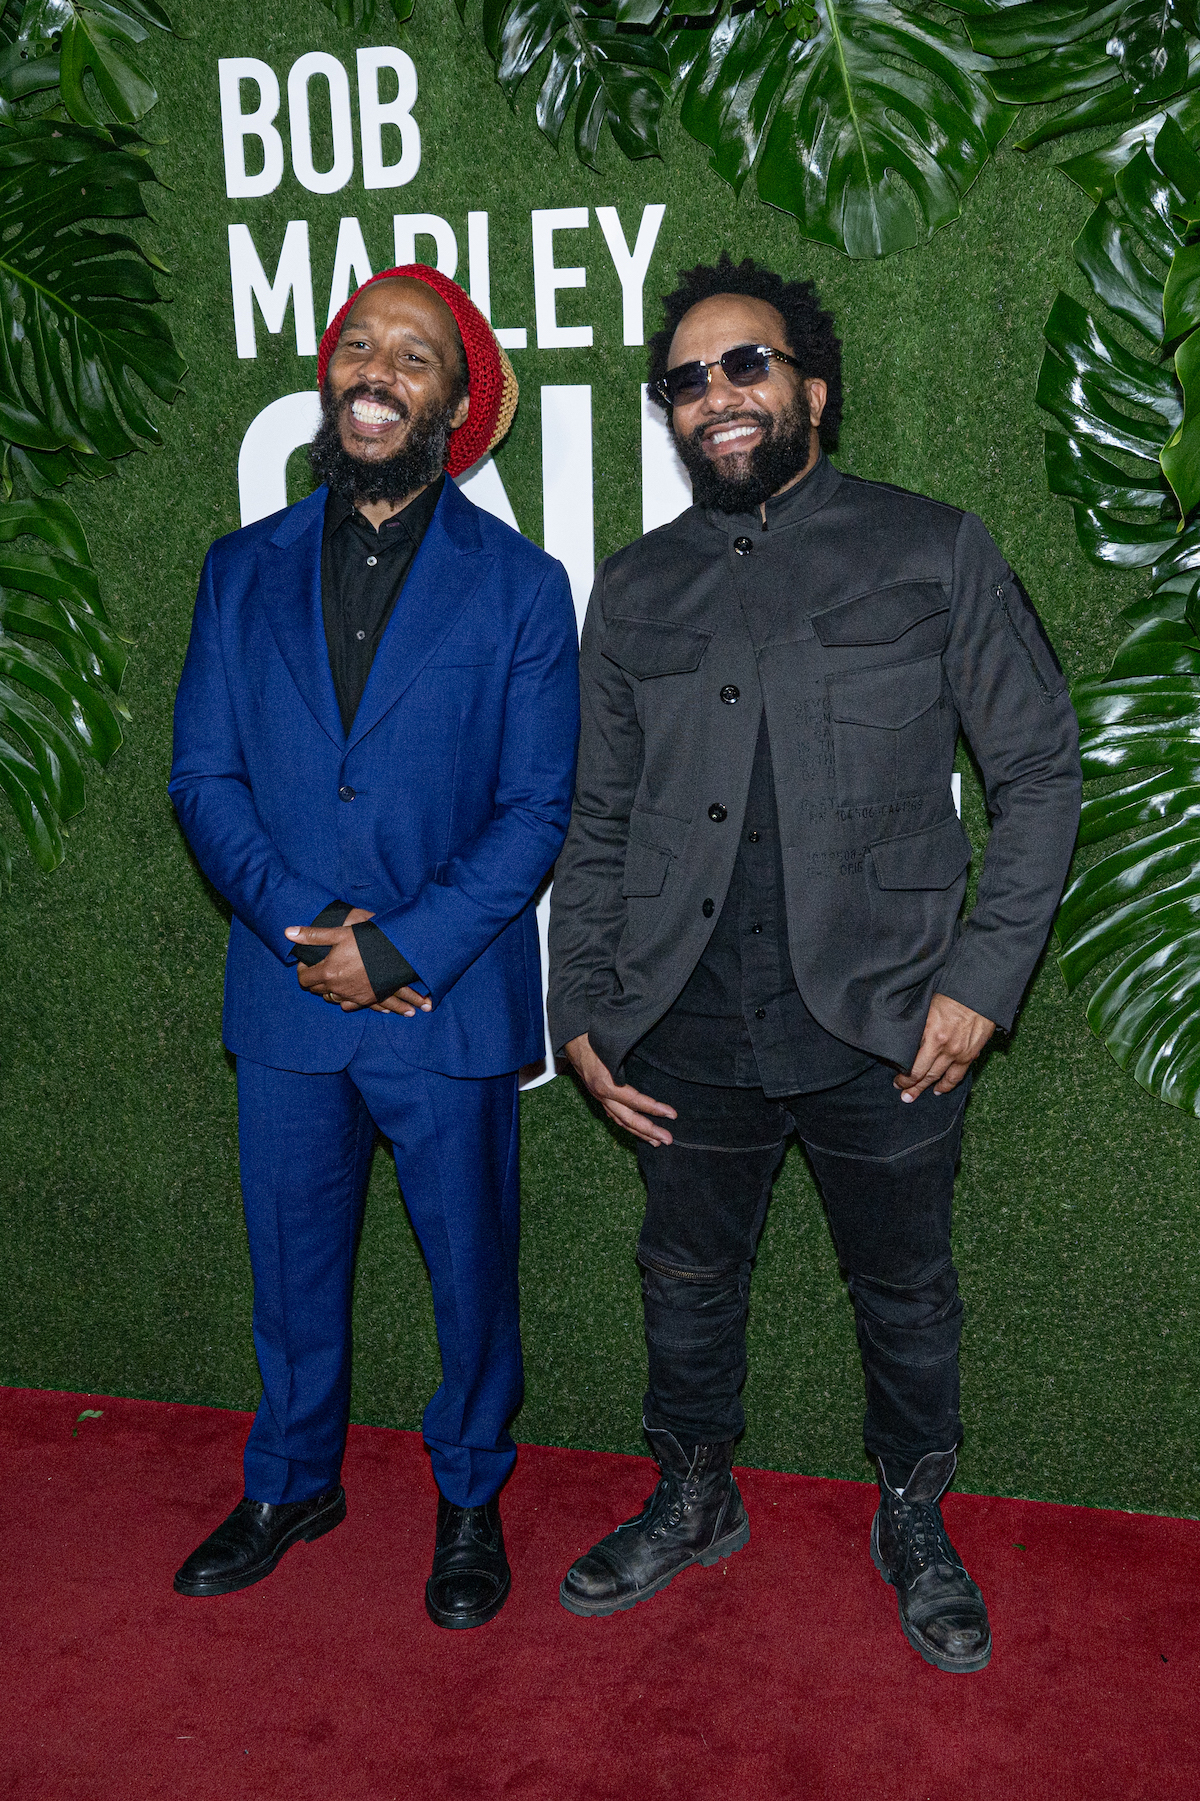 Ziggy and Ky-Mani Marley attend the Bob Marley: One Love Jamaica Premiere